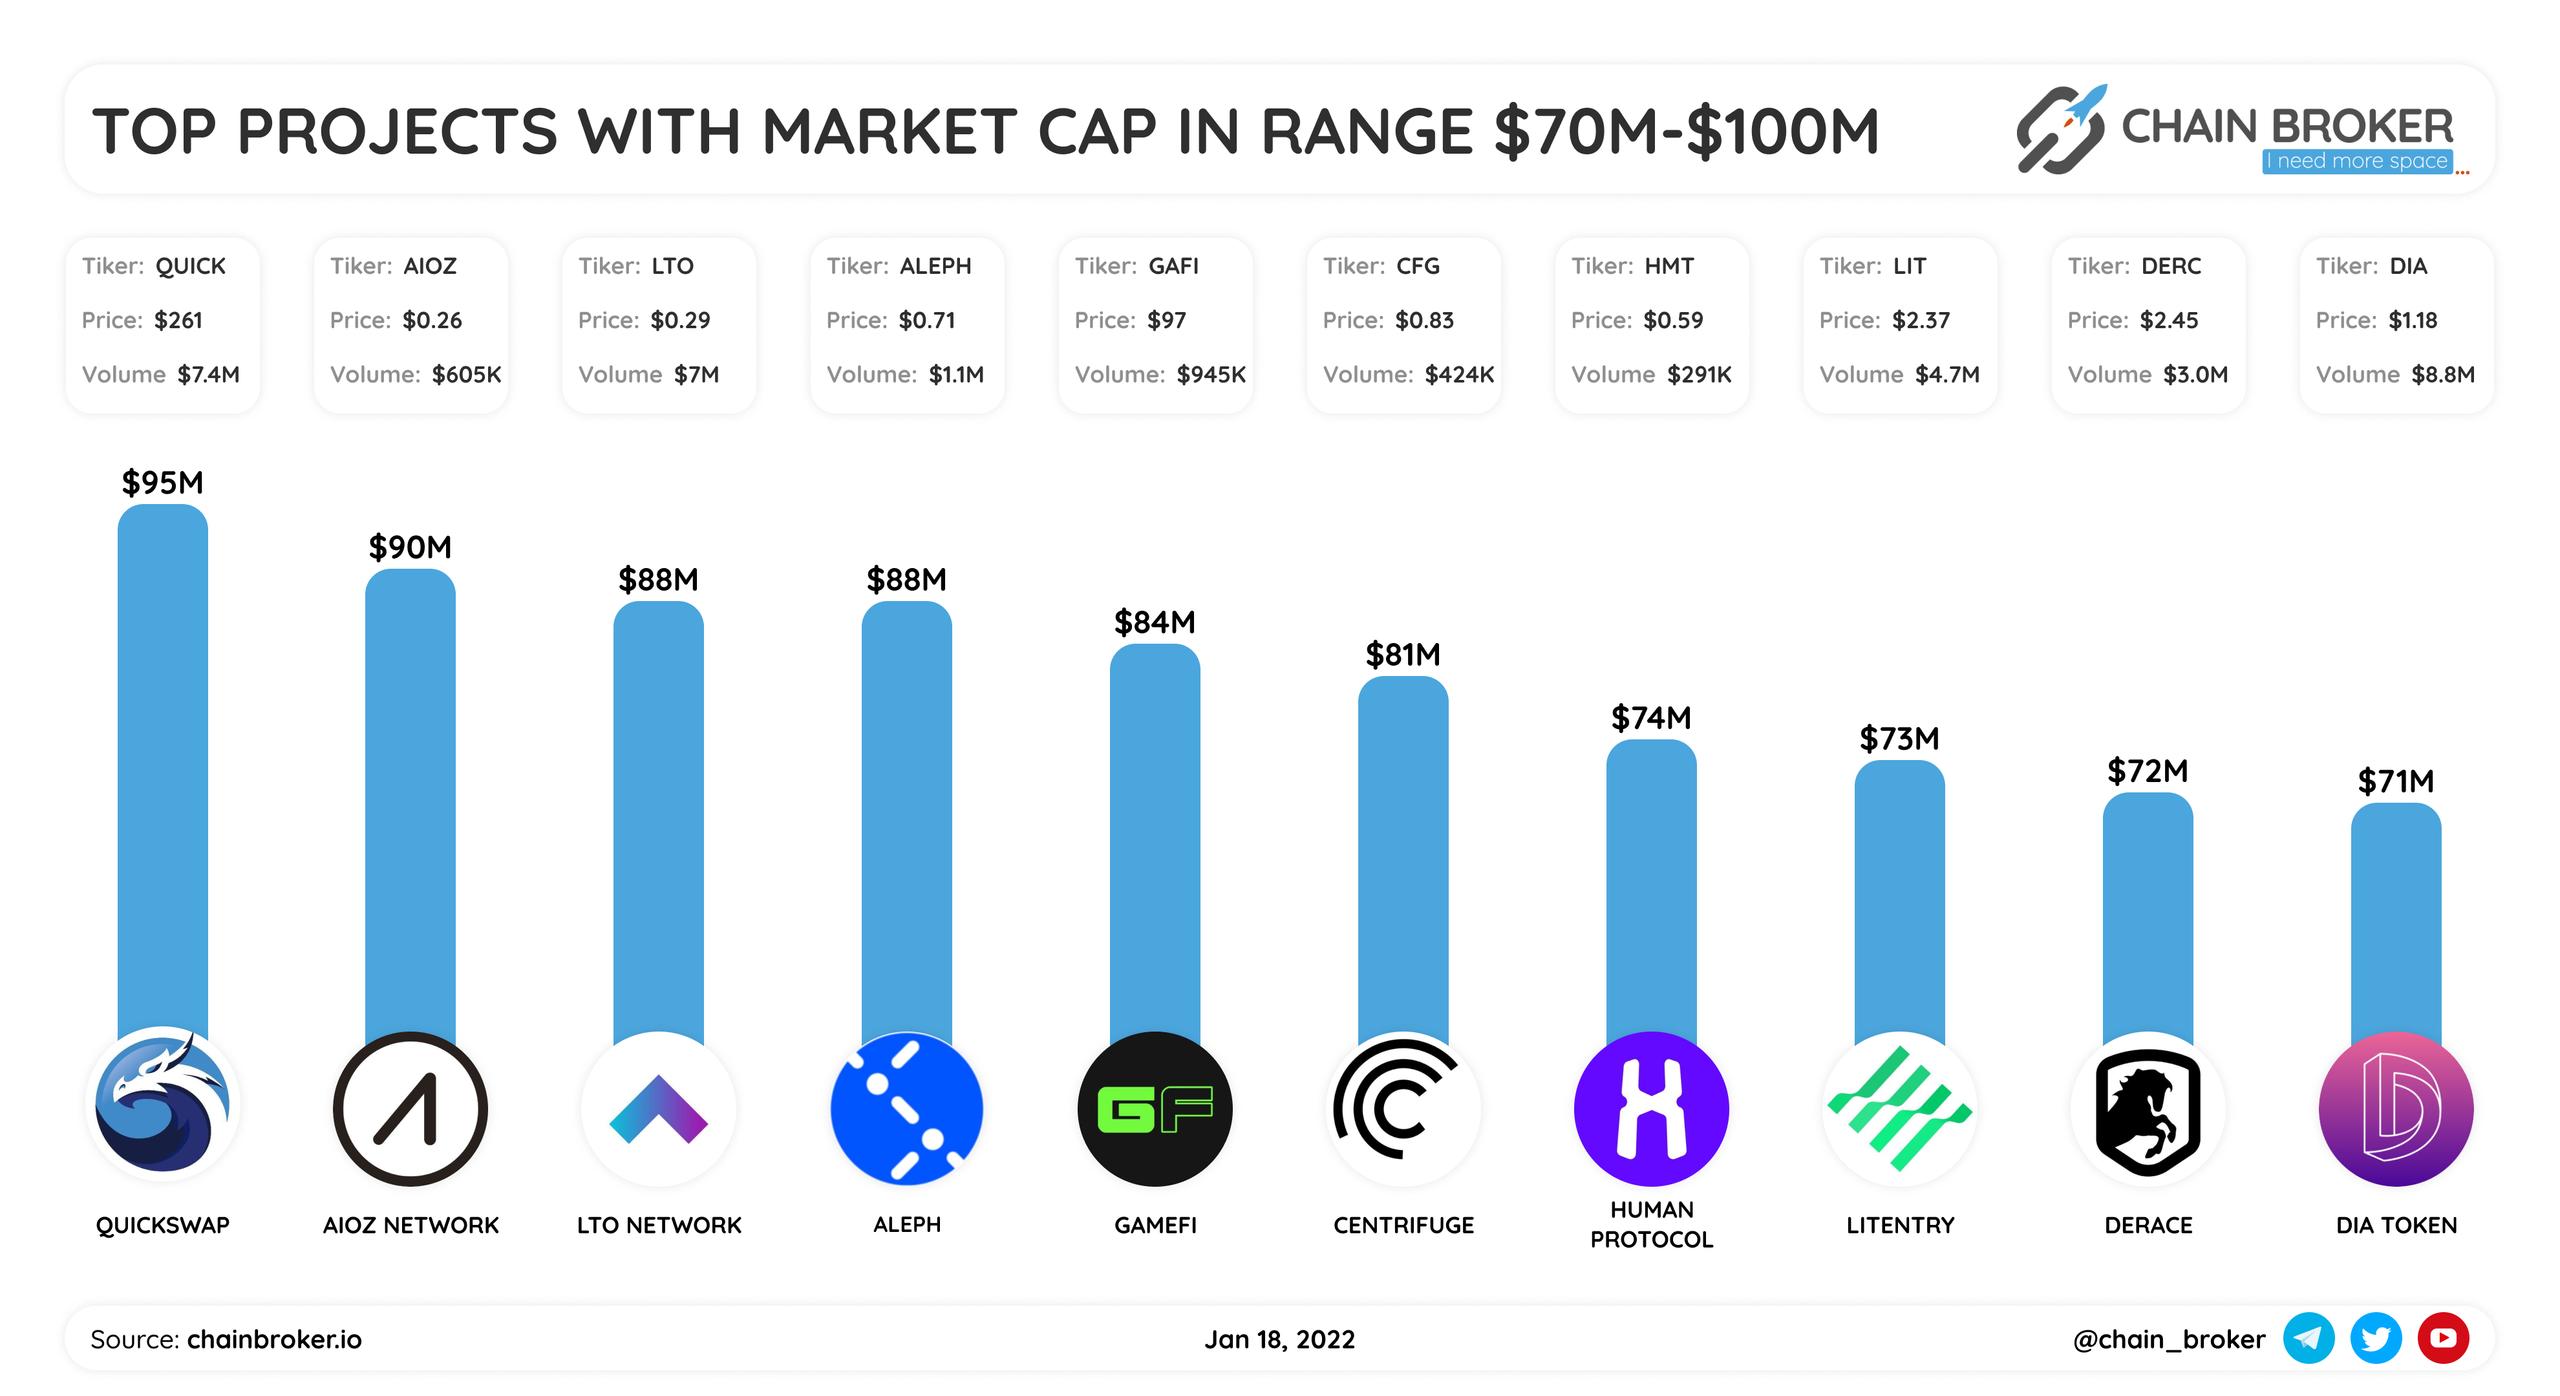 Top projects with market cap range $70M-$100M